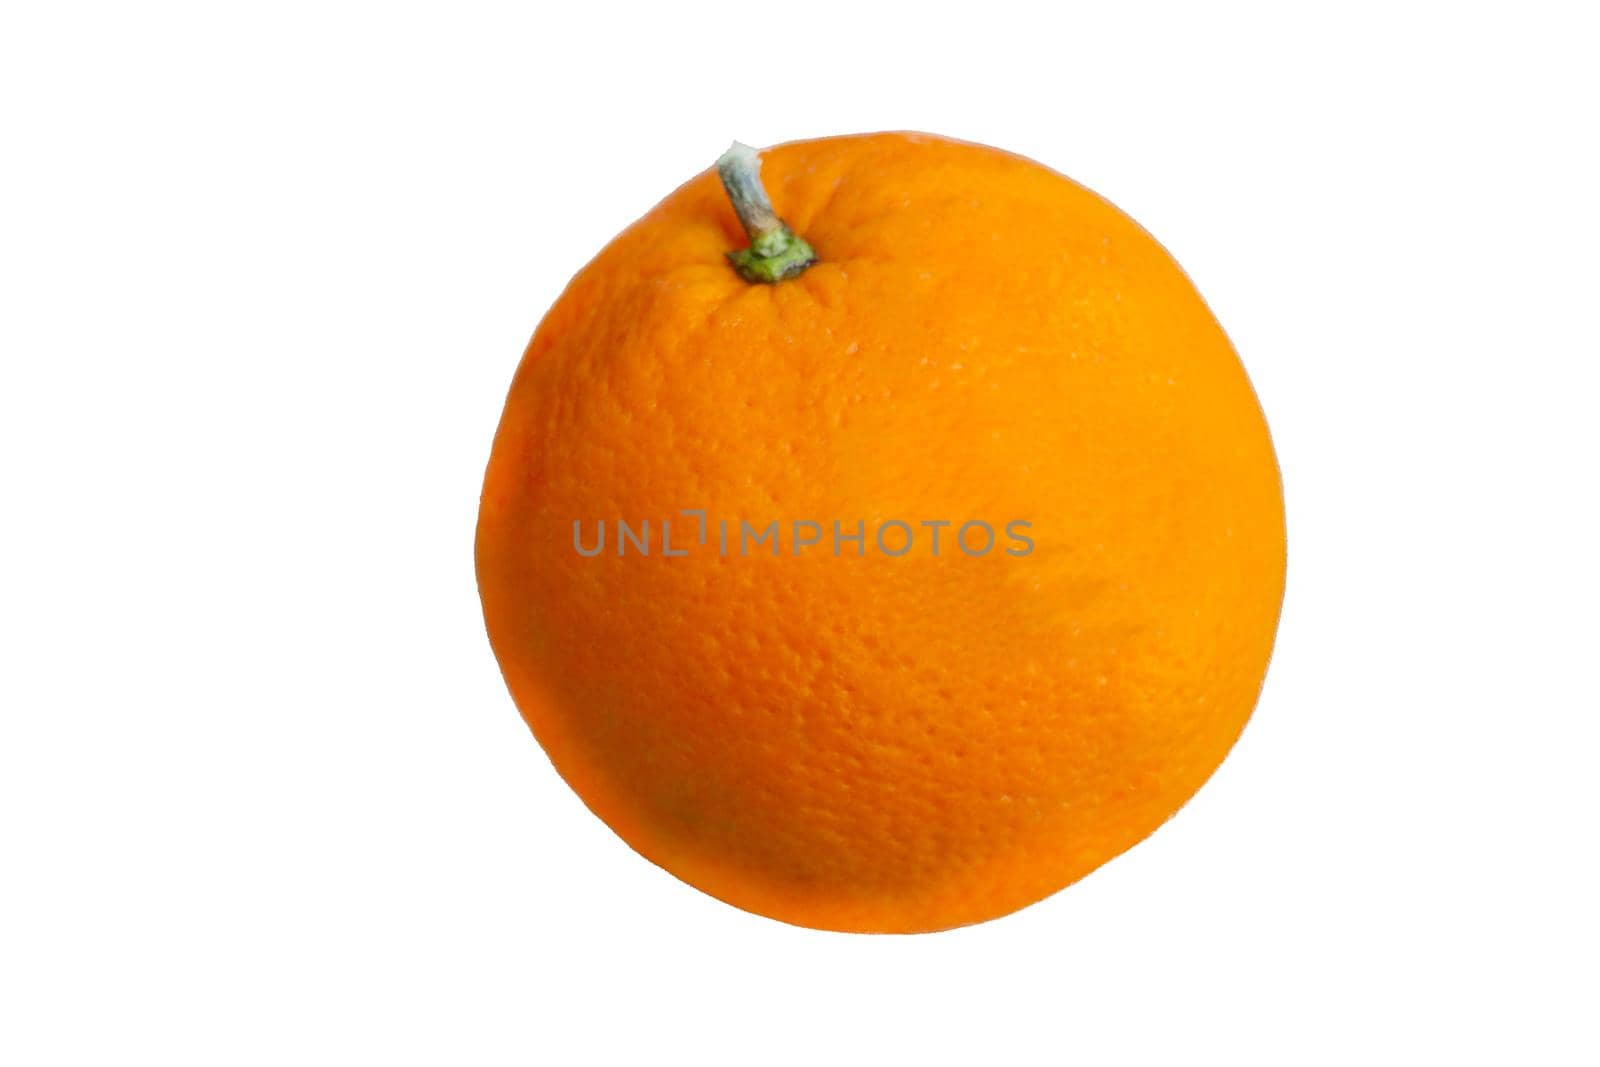 A delicious orange fruit is an orange. On a white background is a fruit